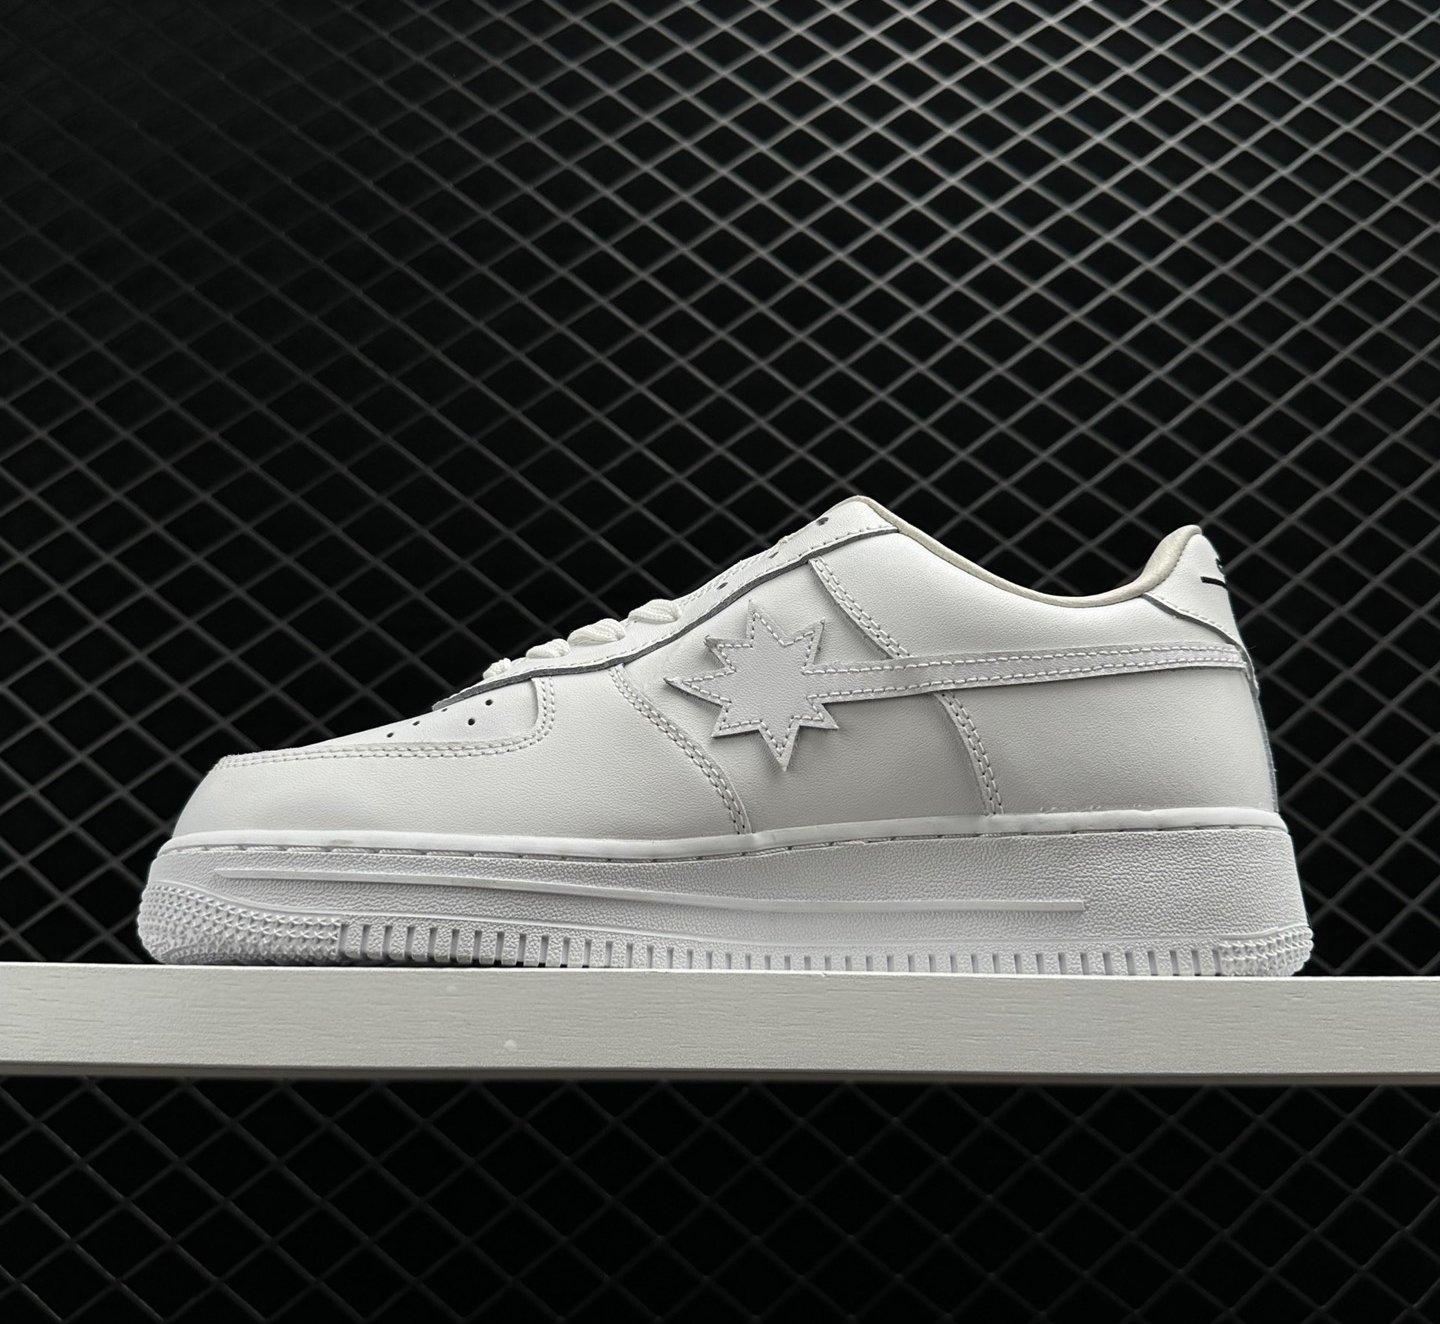 A Bathing Ape Bape Sta Low M2 White Leather G80191007-WHT: Stylish and High-Quality Sneakers